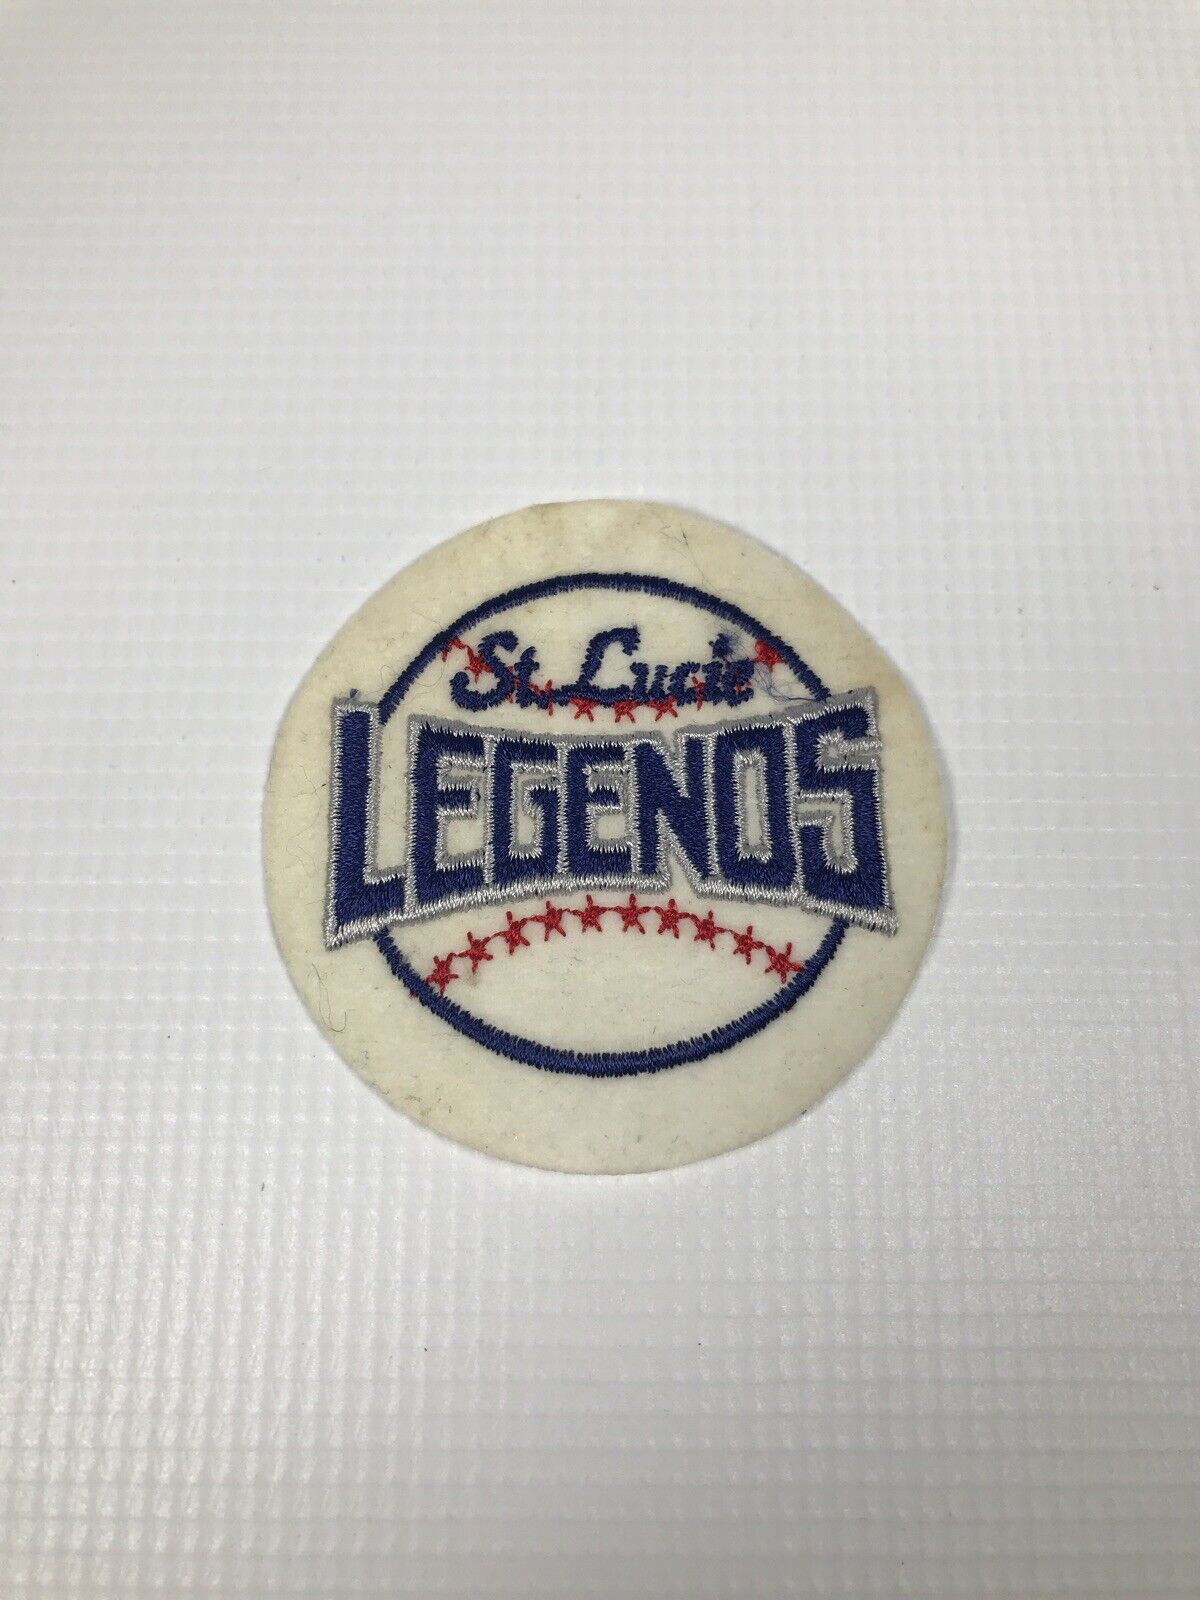 Vintage Senior Baseball League St. Lucie Legends Team Issued Jersey Patch